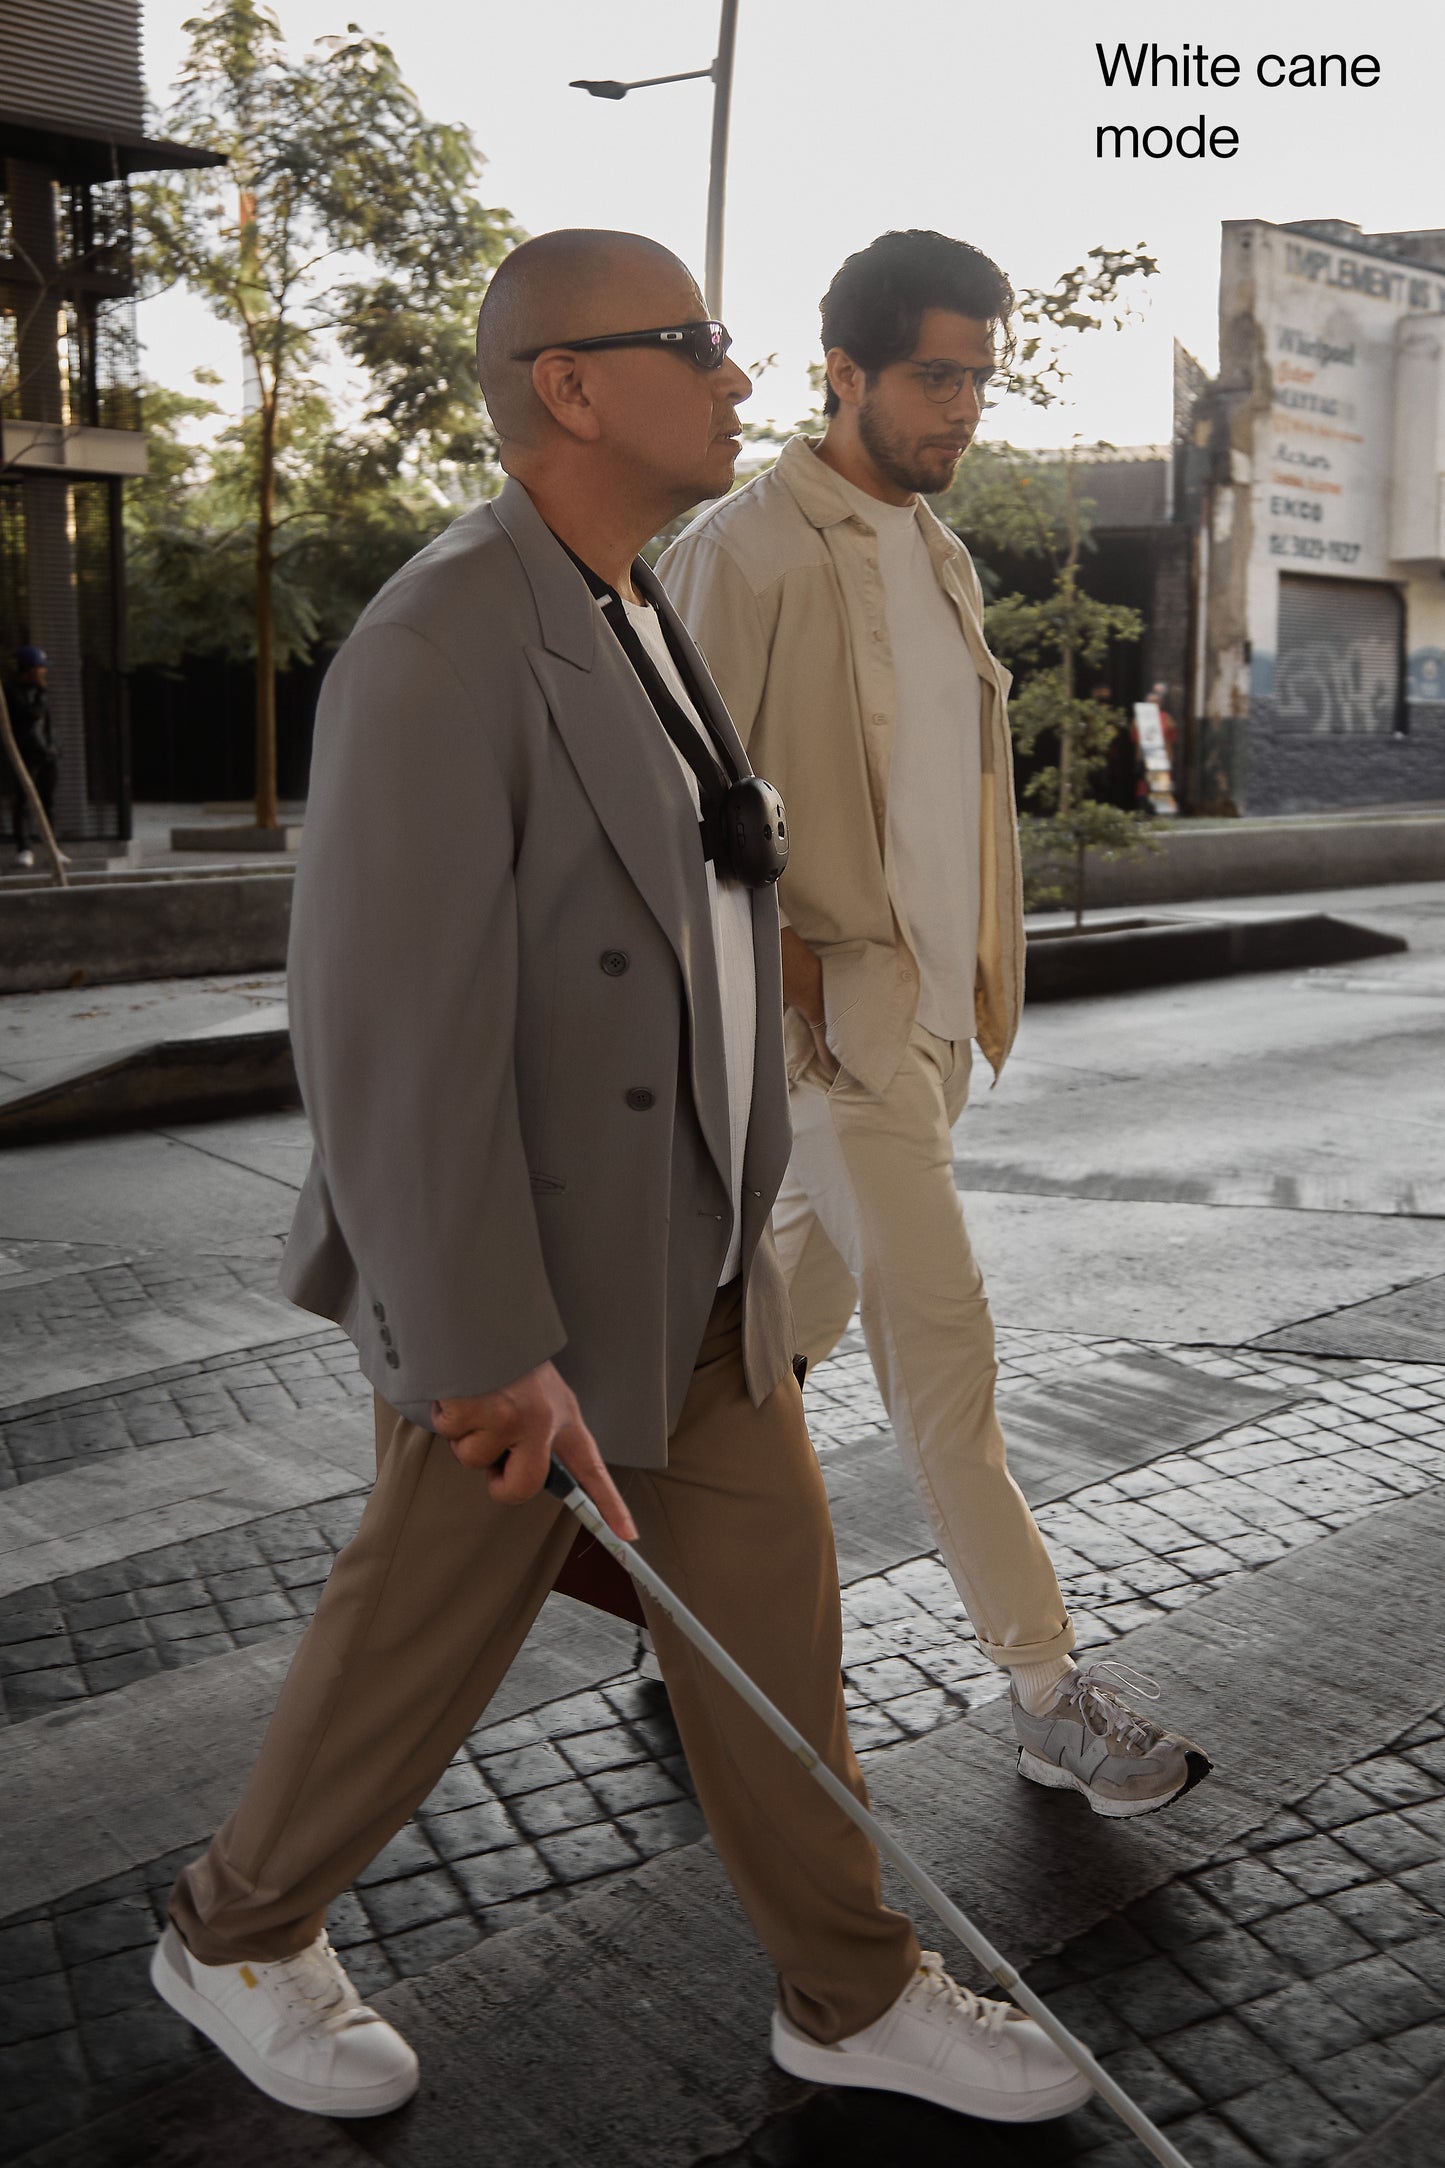 The image shows 2 men walking across a cross walk, one with glasses,  Ara and a white cane. The other man is walking along side him.